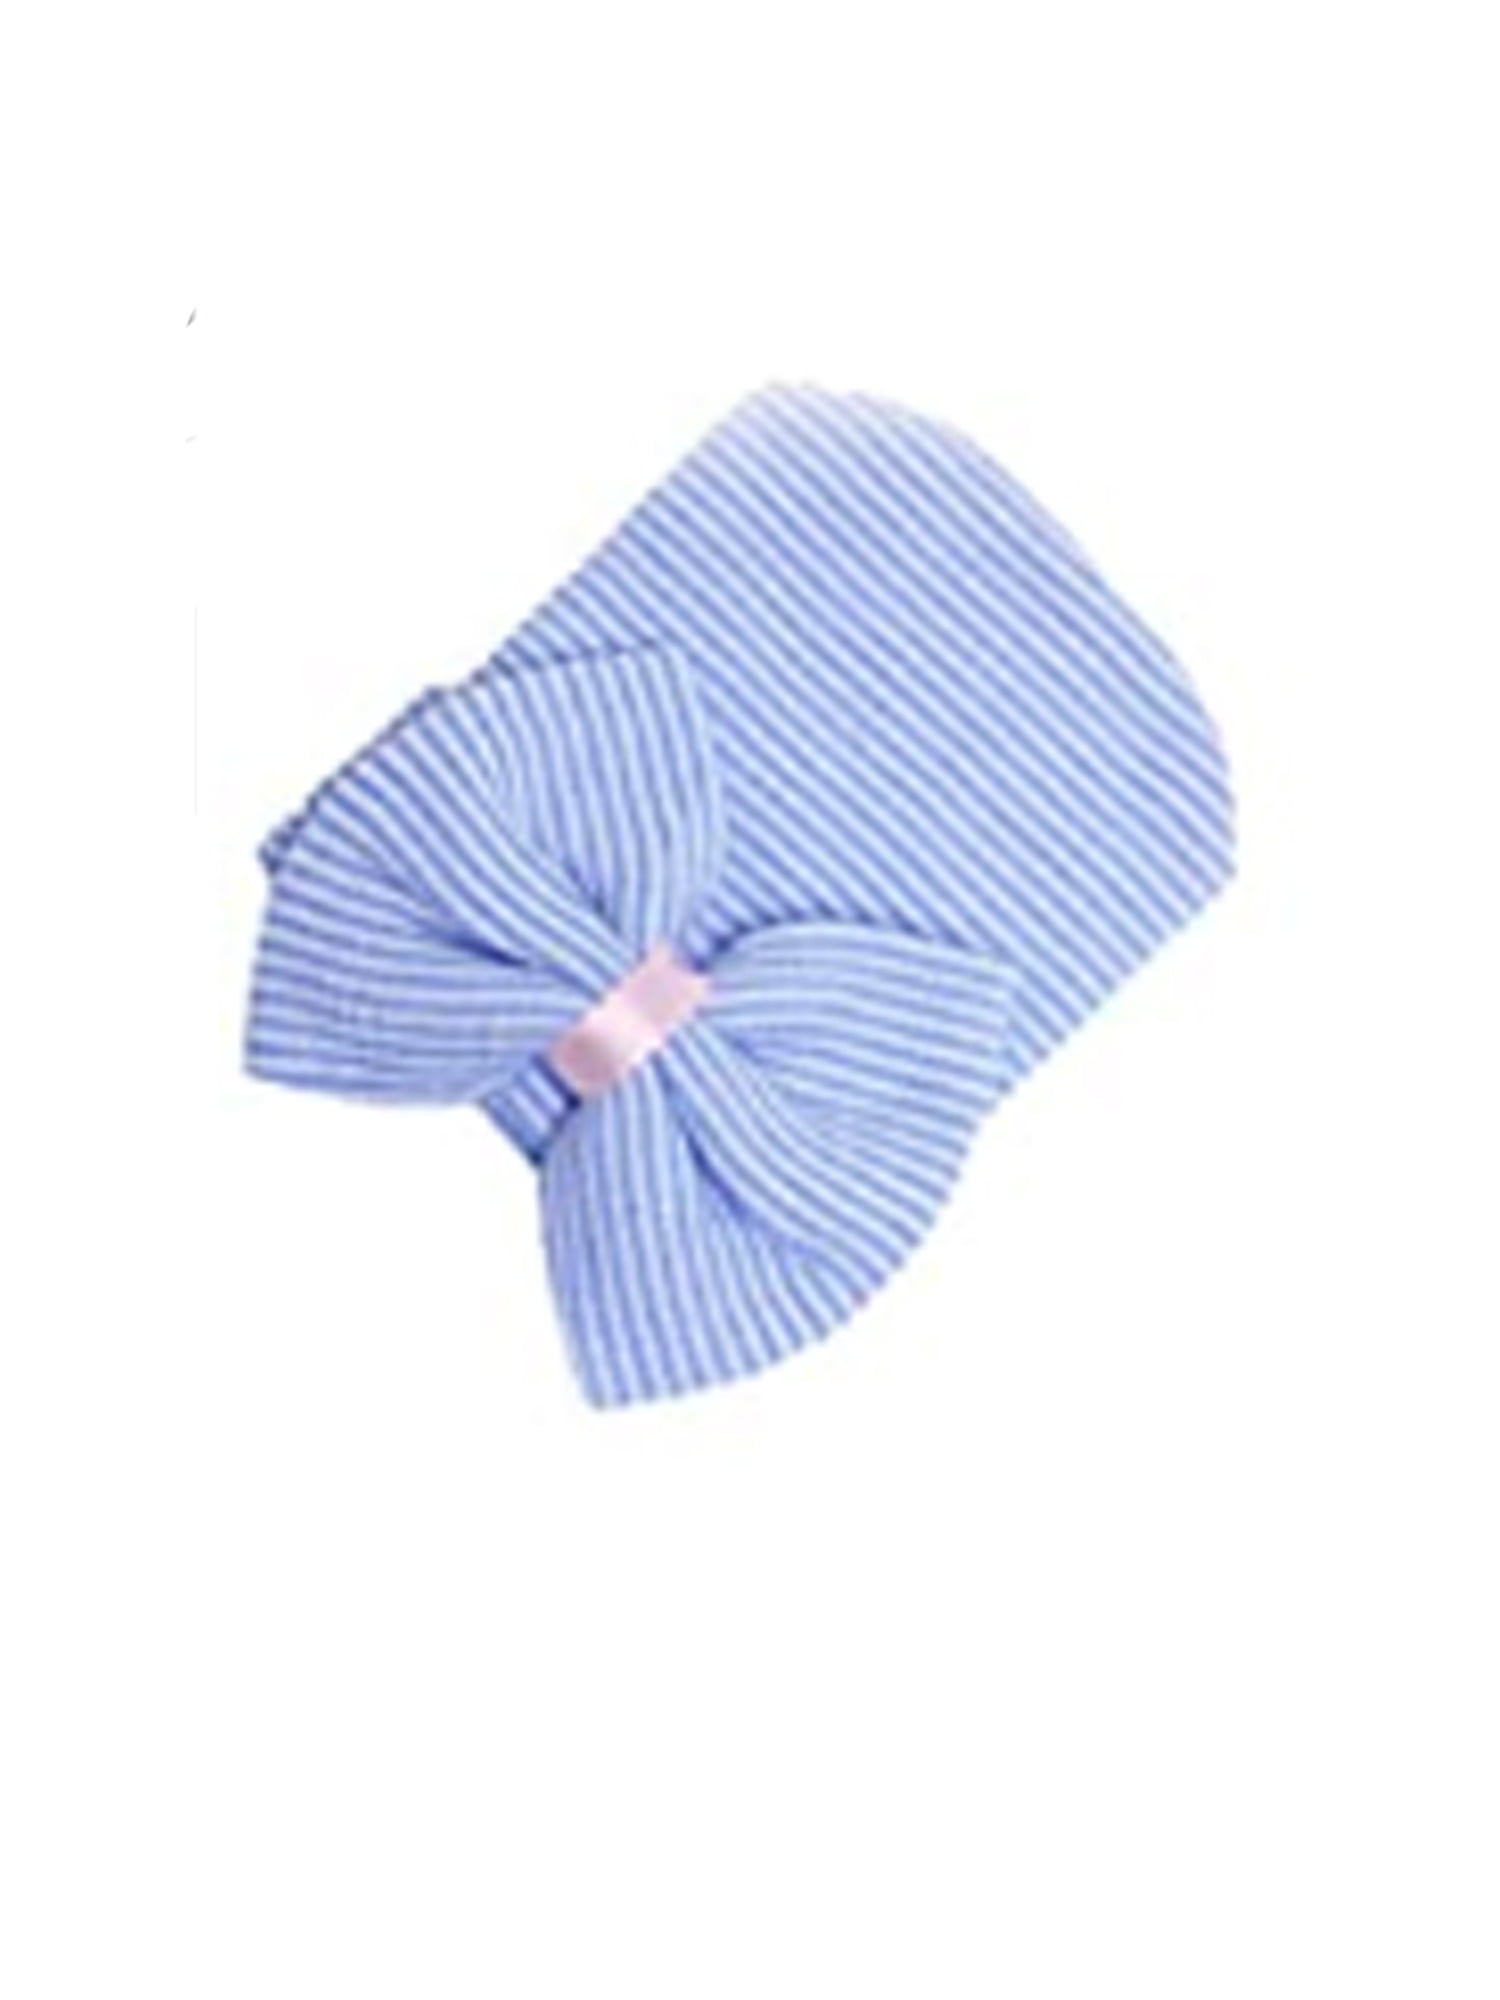 Details about  / Toddler Infant Baby Girl Striped Cute Cap Hospital Newborn Bowknot Beanie Hat